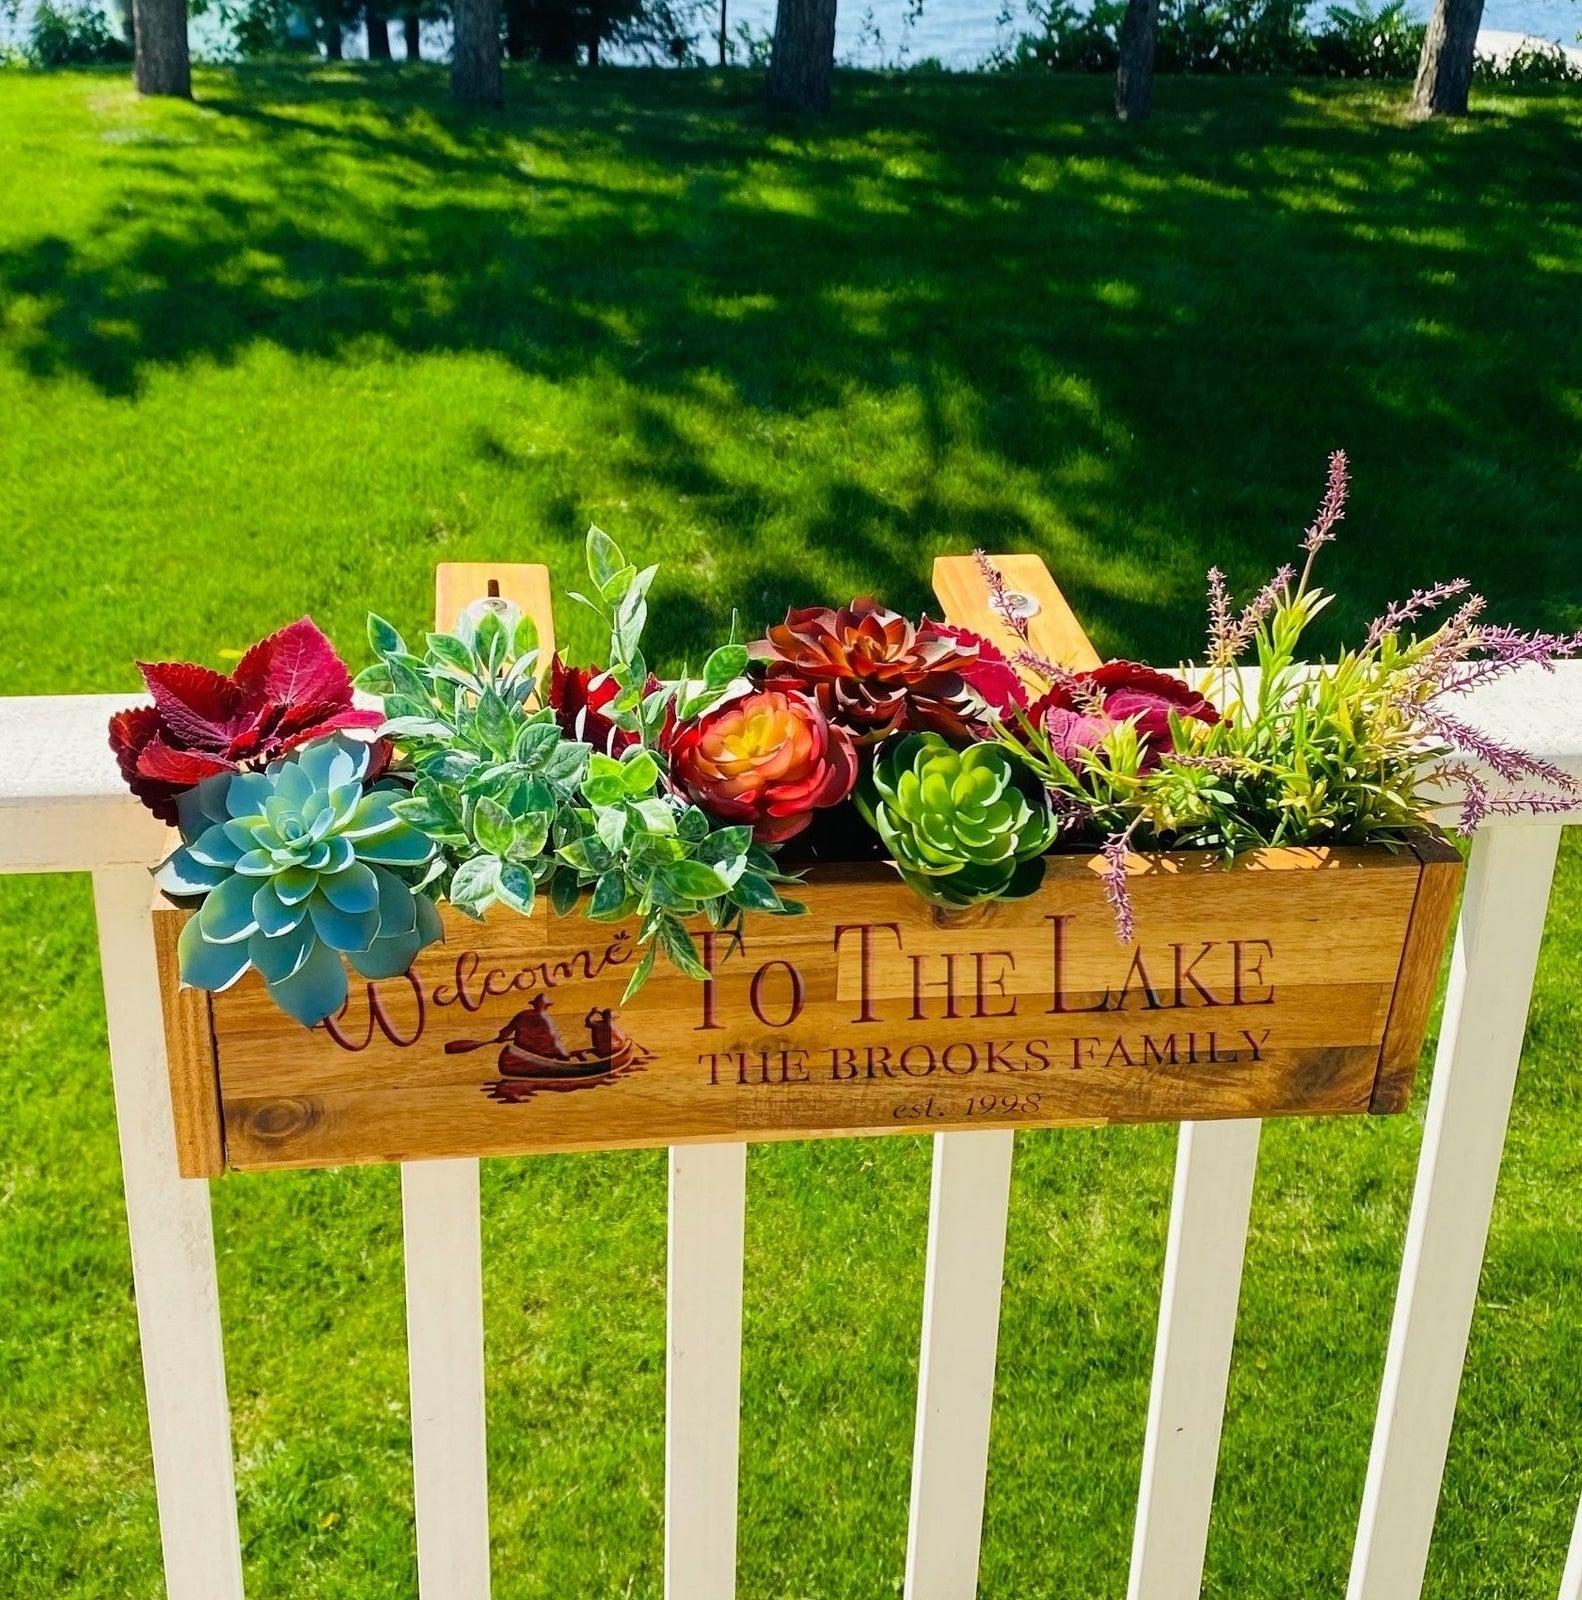 Plants and a personalized sign saying &#x27;Welcome to the Lake, The Brooks Family&#x27; on a fence with a lake in the background